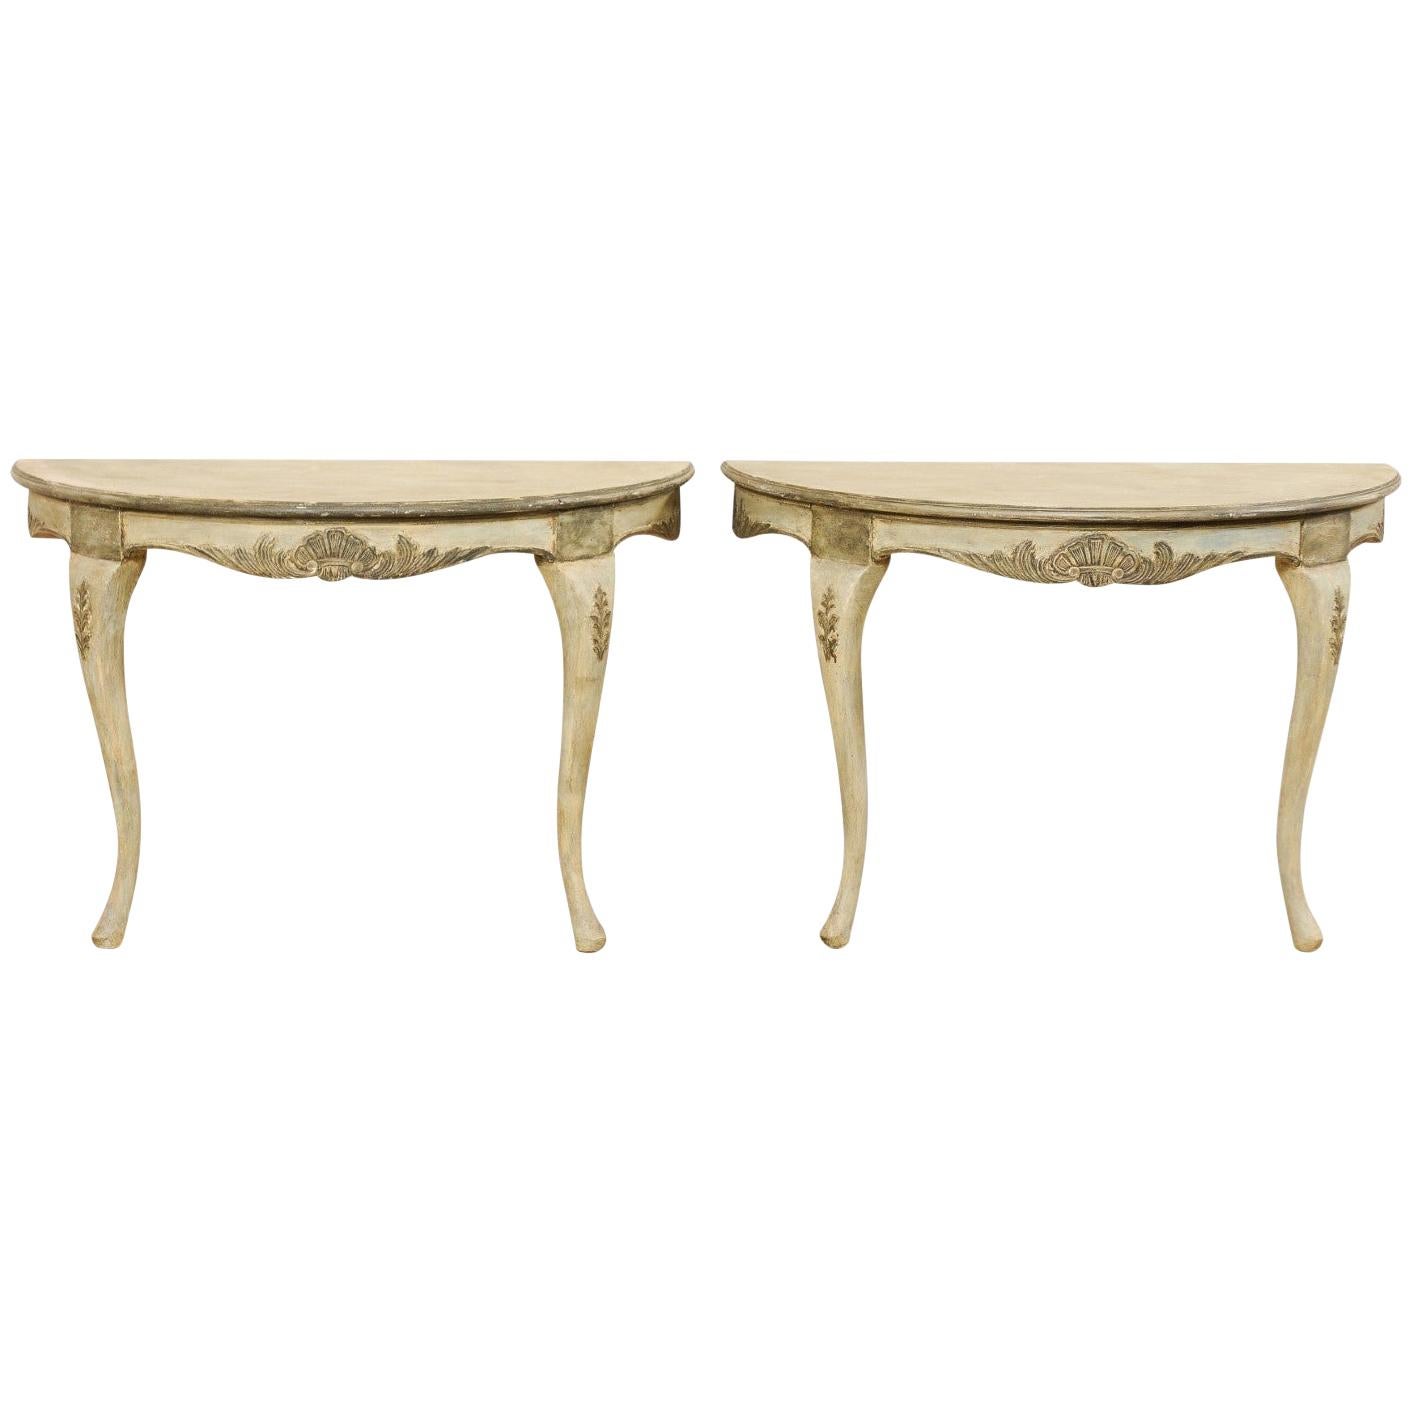 Swedish Pair of Wall-Mounted Demilune Tables with Carved Shell & Foliage Accents For Sale